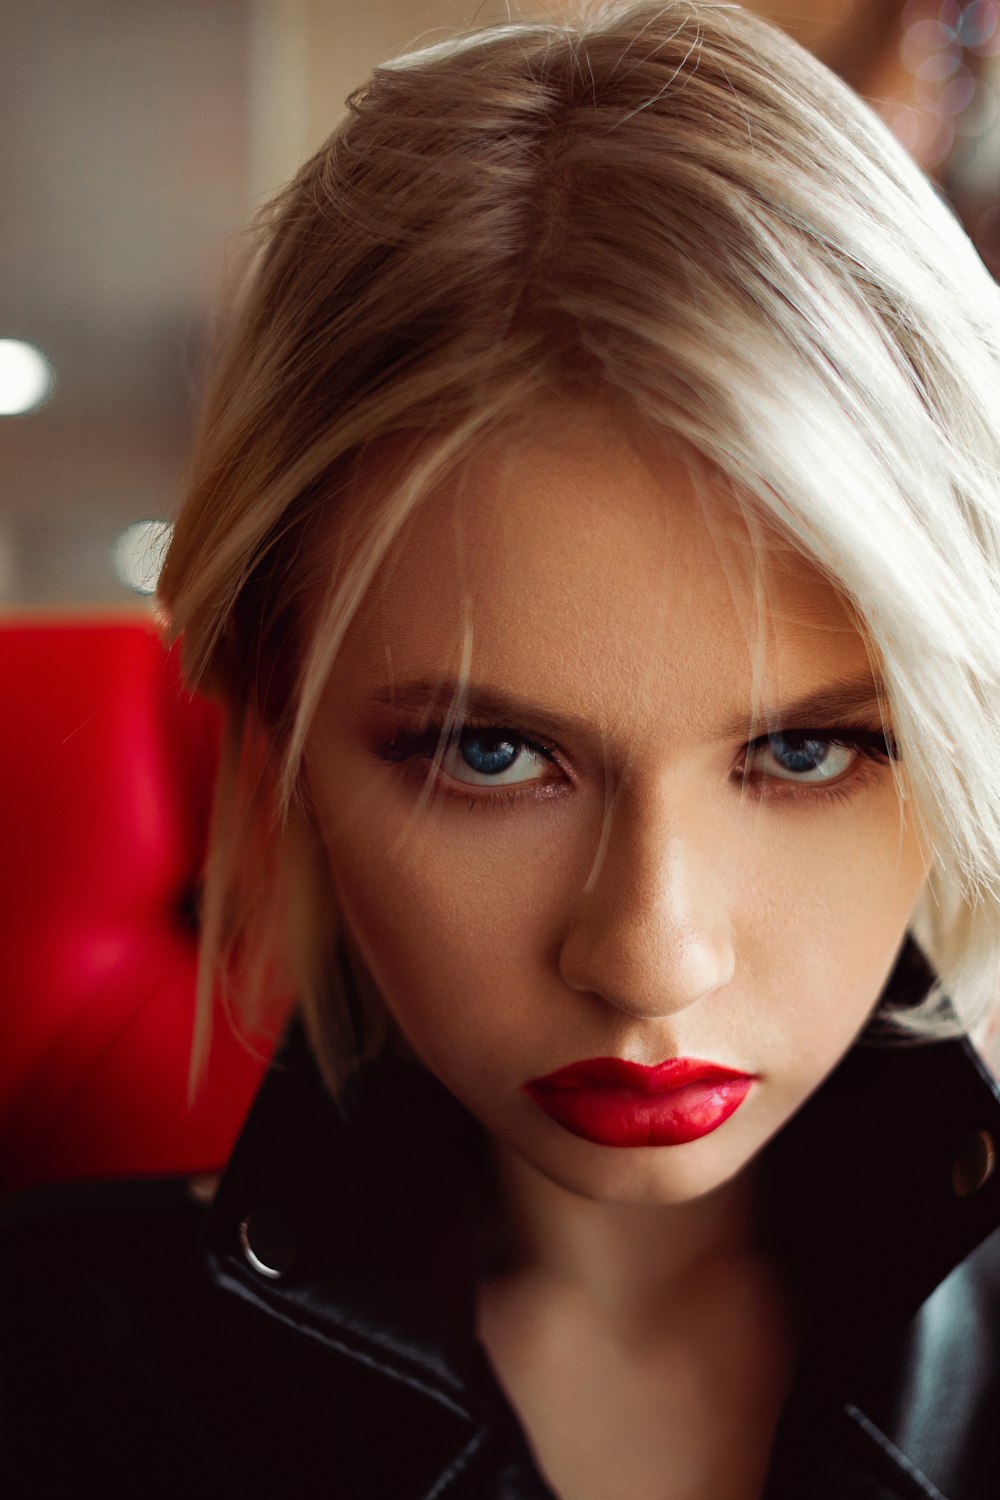 Serrated Badeværelse Overhale woman with blonde hair wearing red lipstick photo – Free Red lips Image on  Unsplash